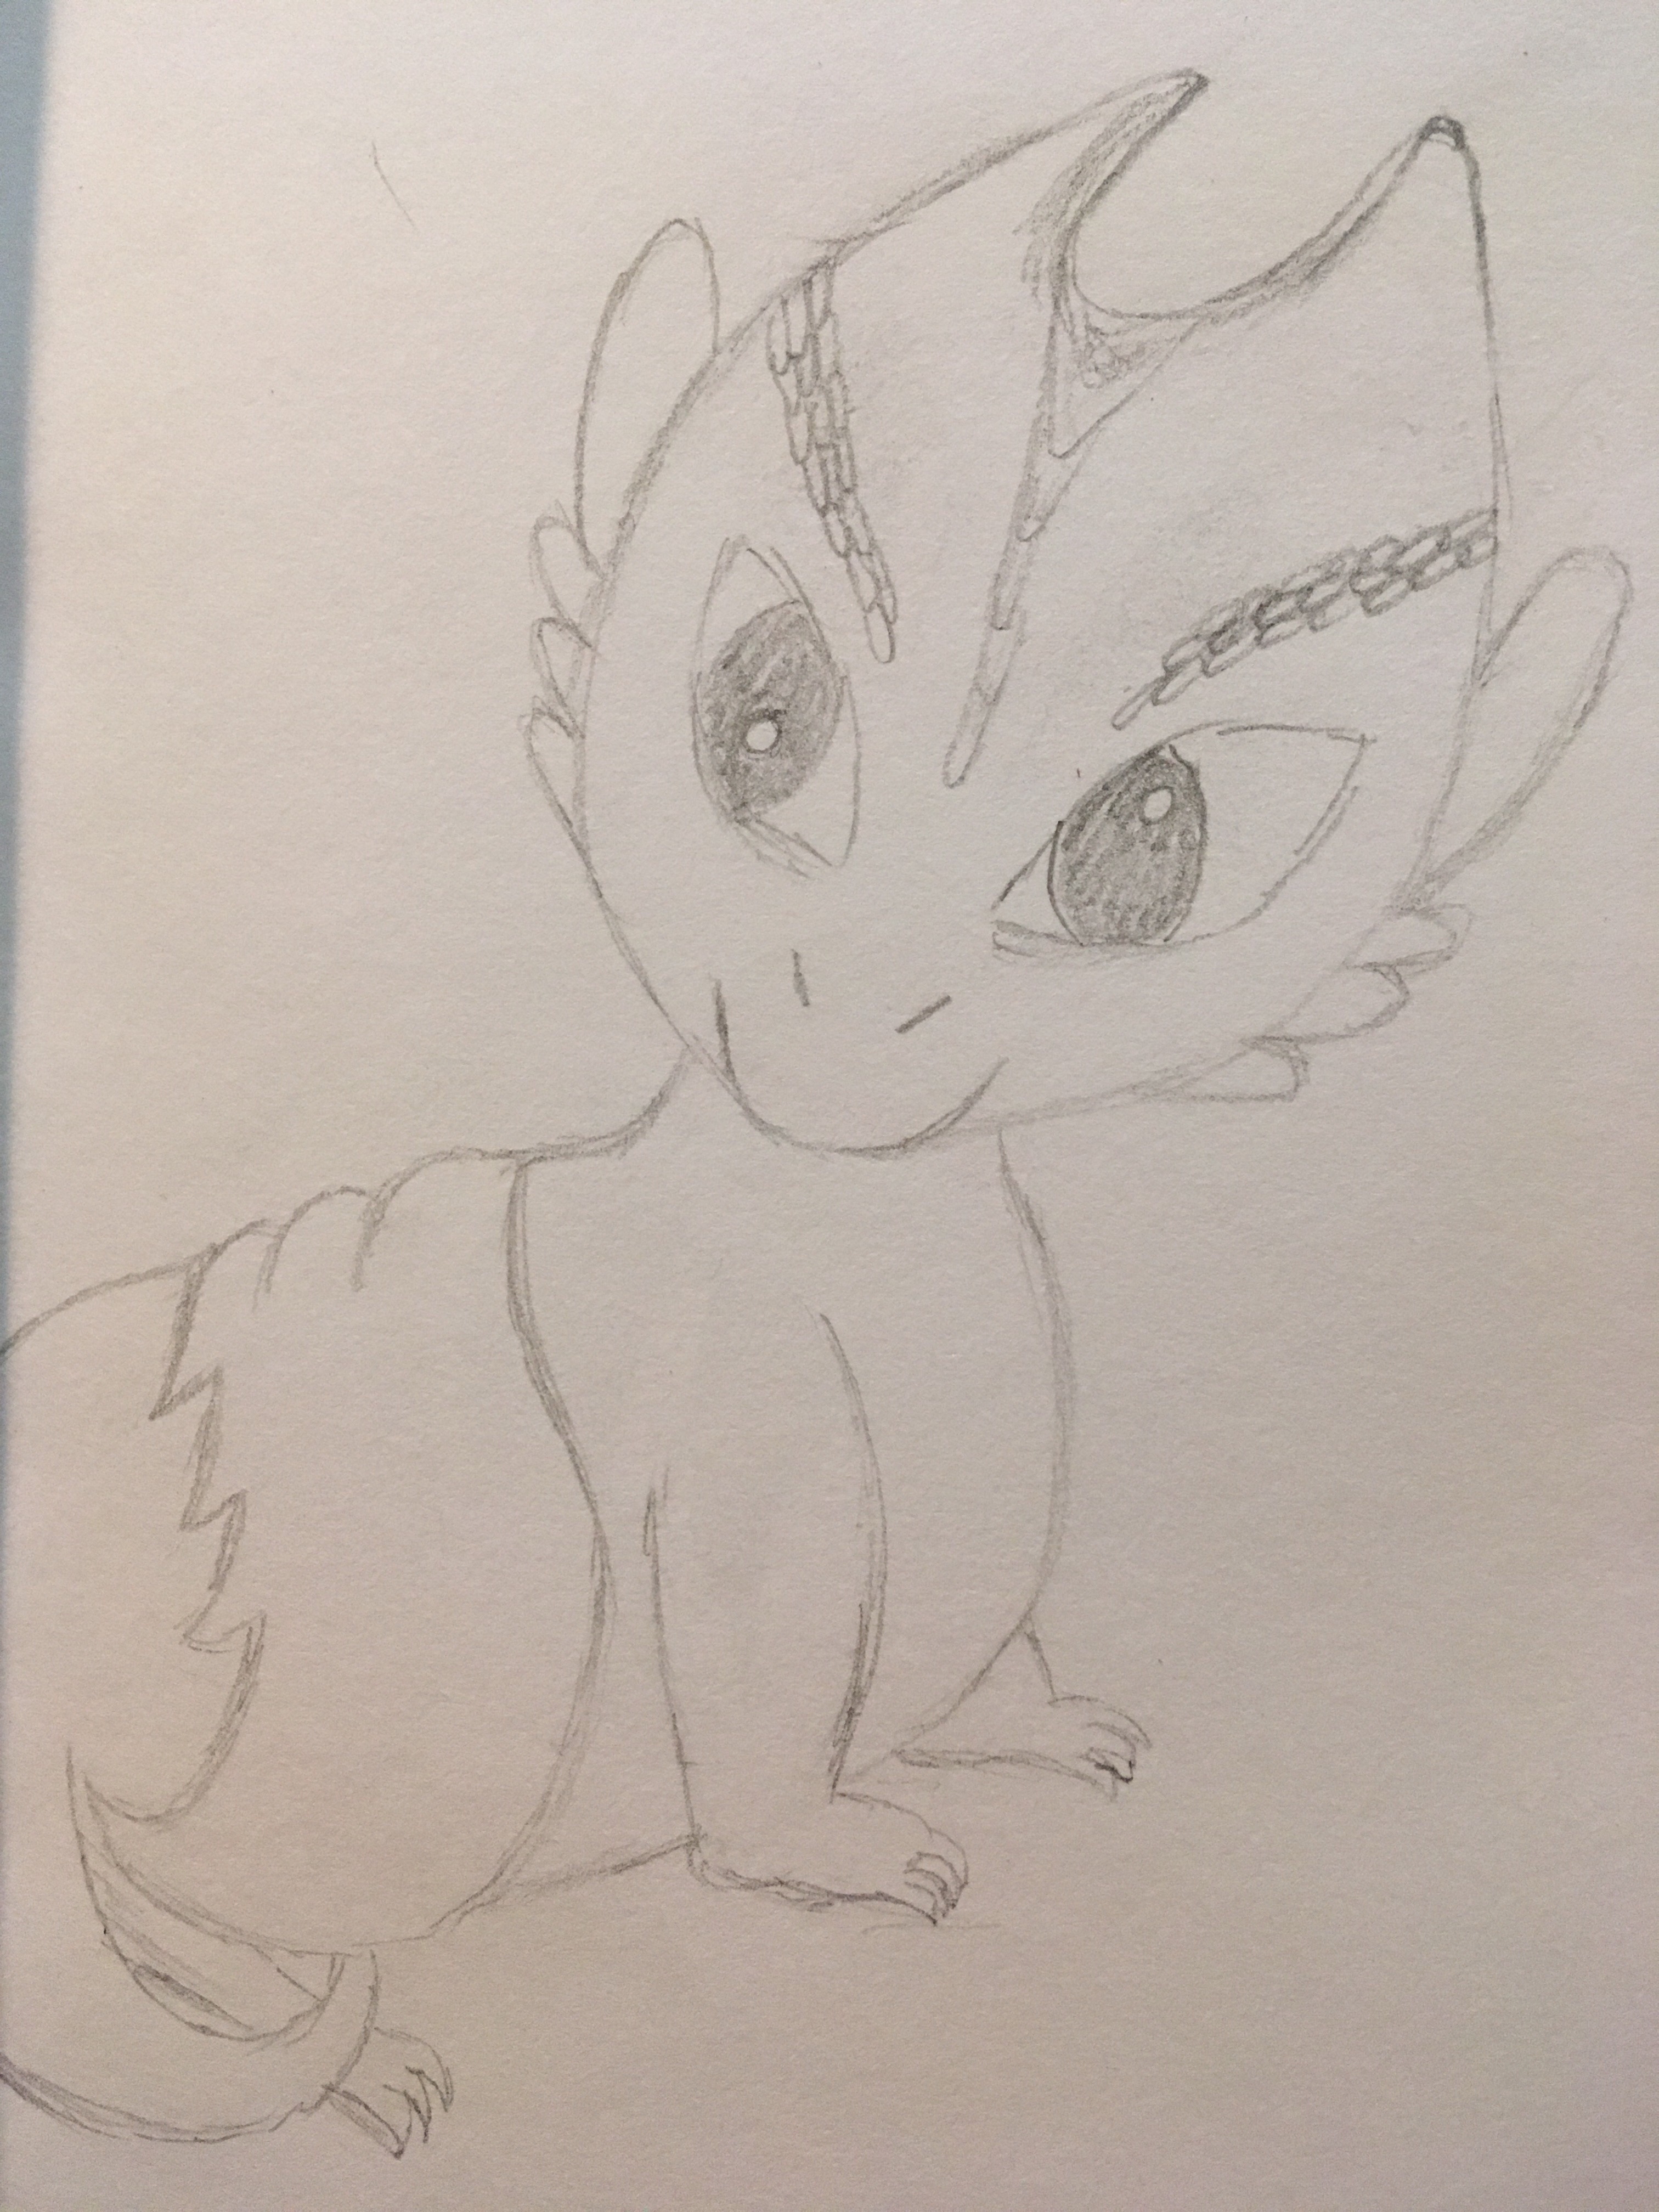 Complete dragon in pencil with big eyes took three days